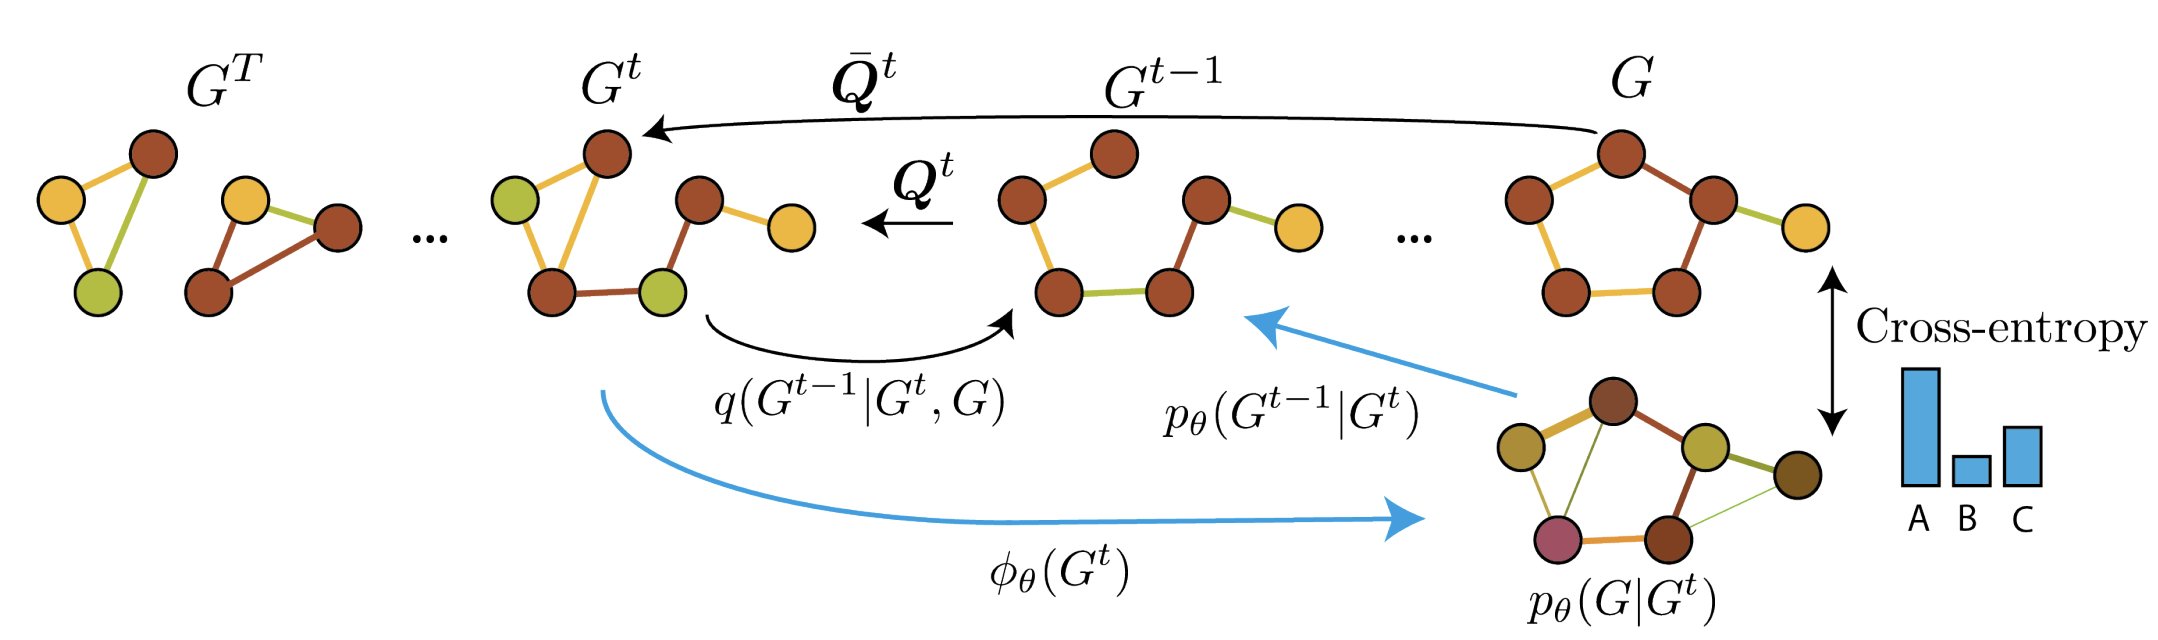 Graph generation with diffusion models. (Figure taken from [19])